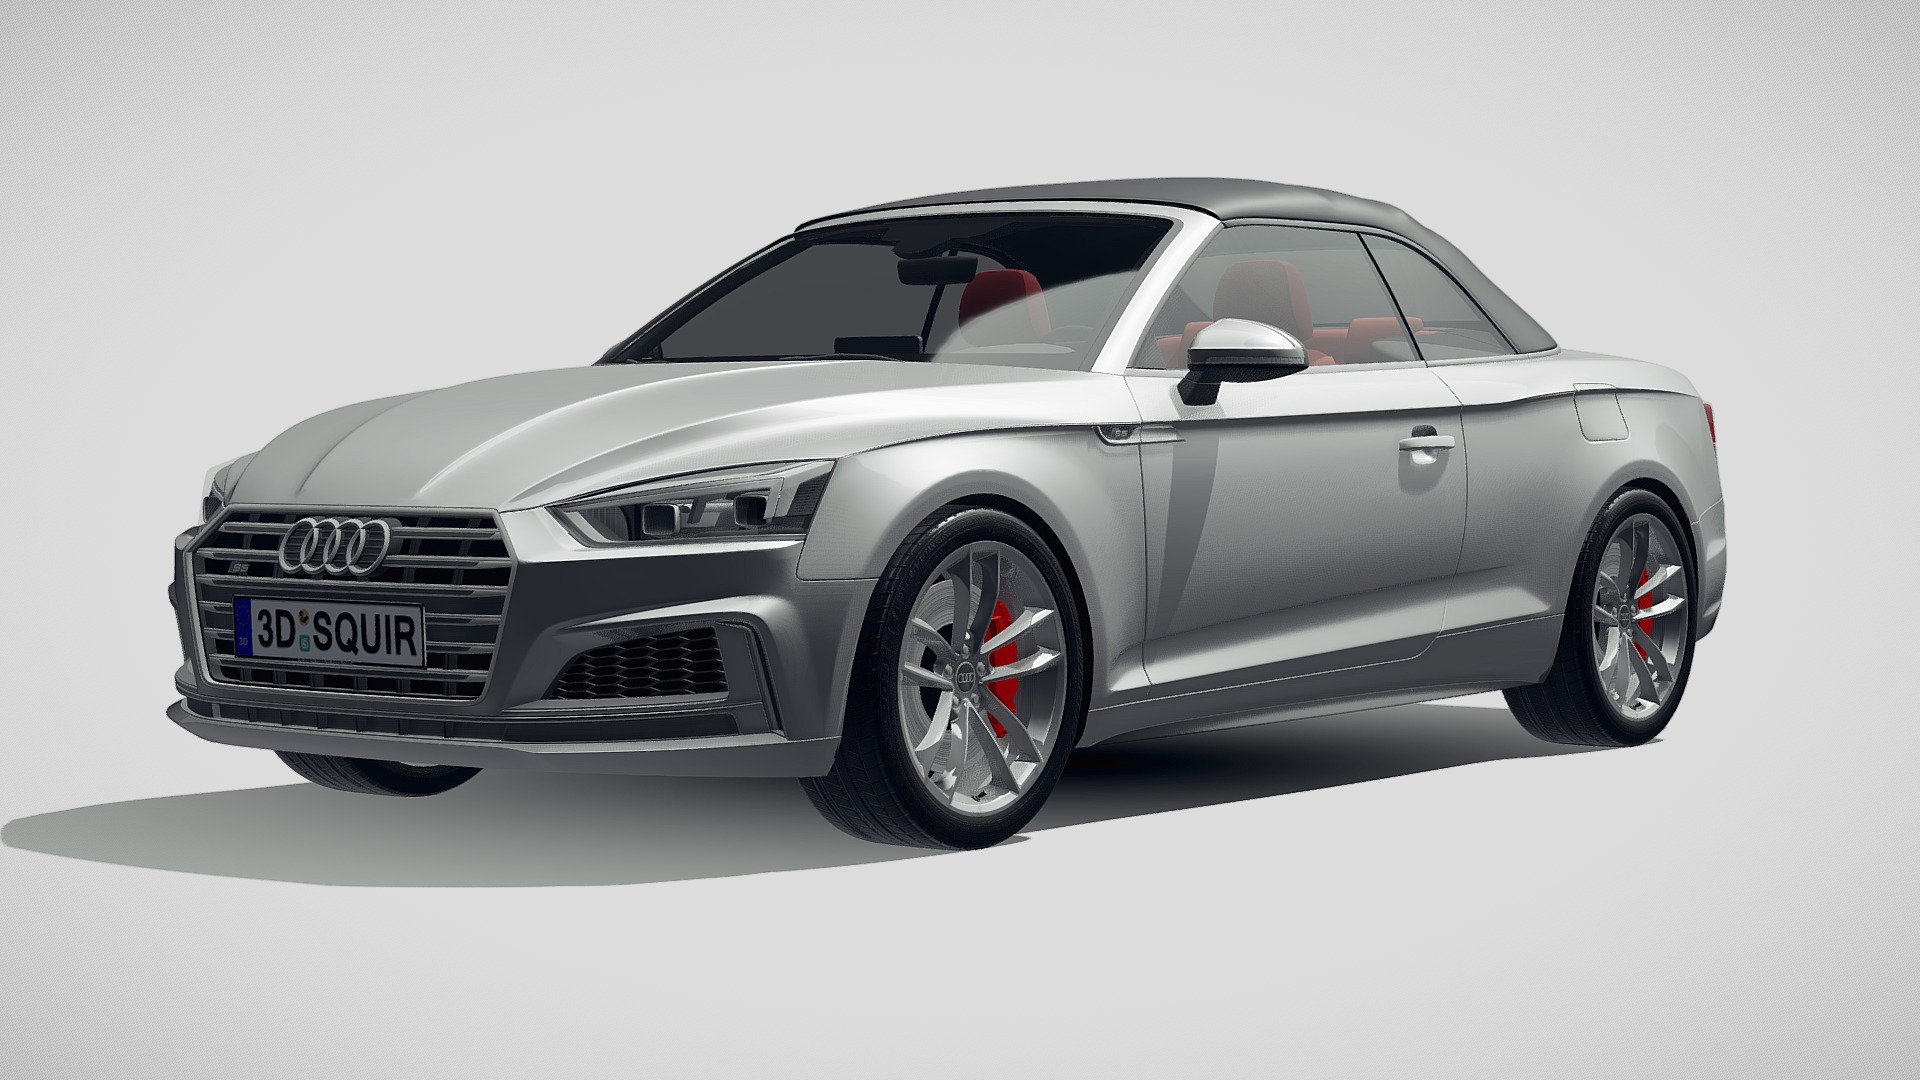 3D model Audi s5 Cabriolet 2019 - This is a 3D model of the Audi s5 Cabriolet 2019. The 3D model is about a silver sports car.